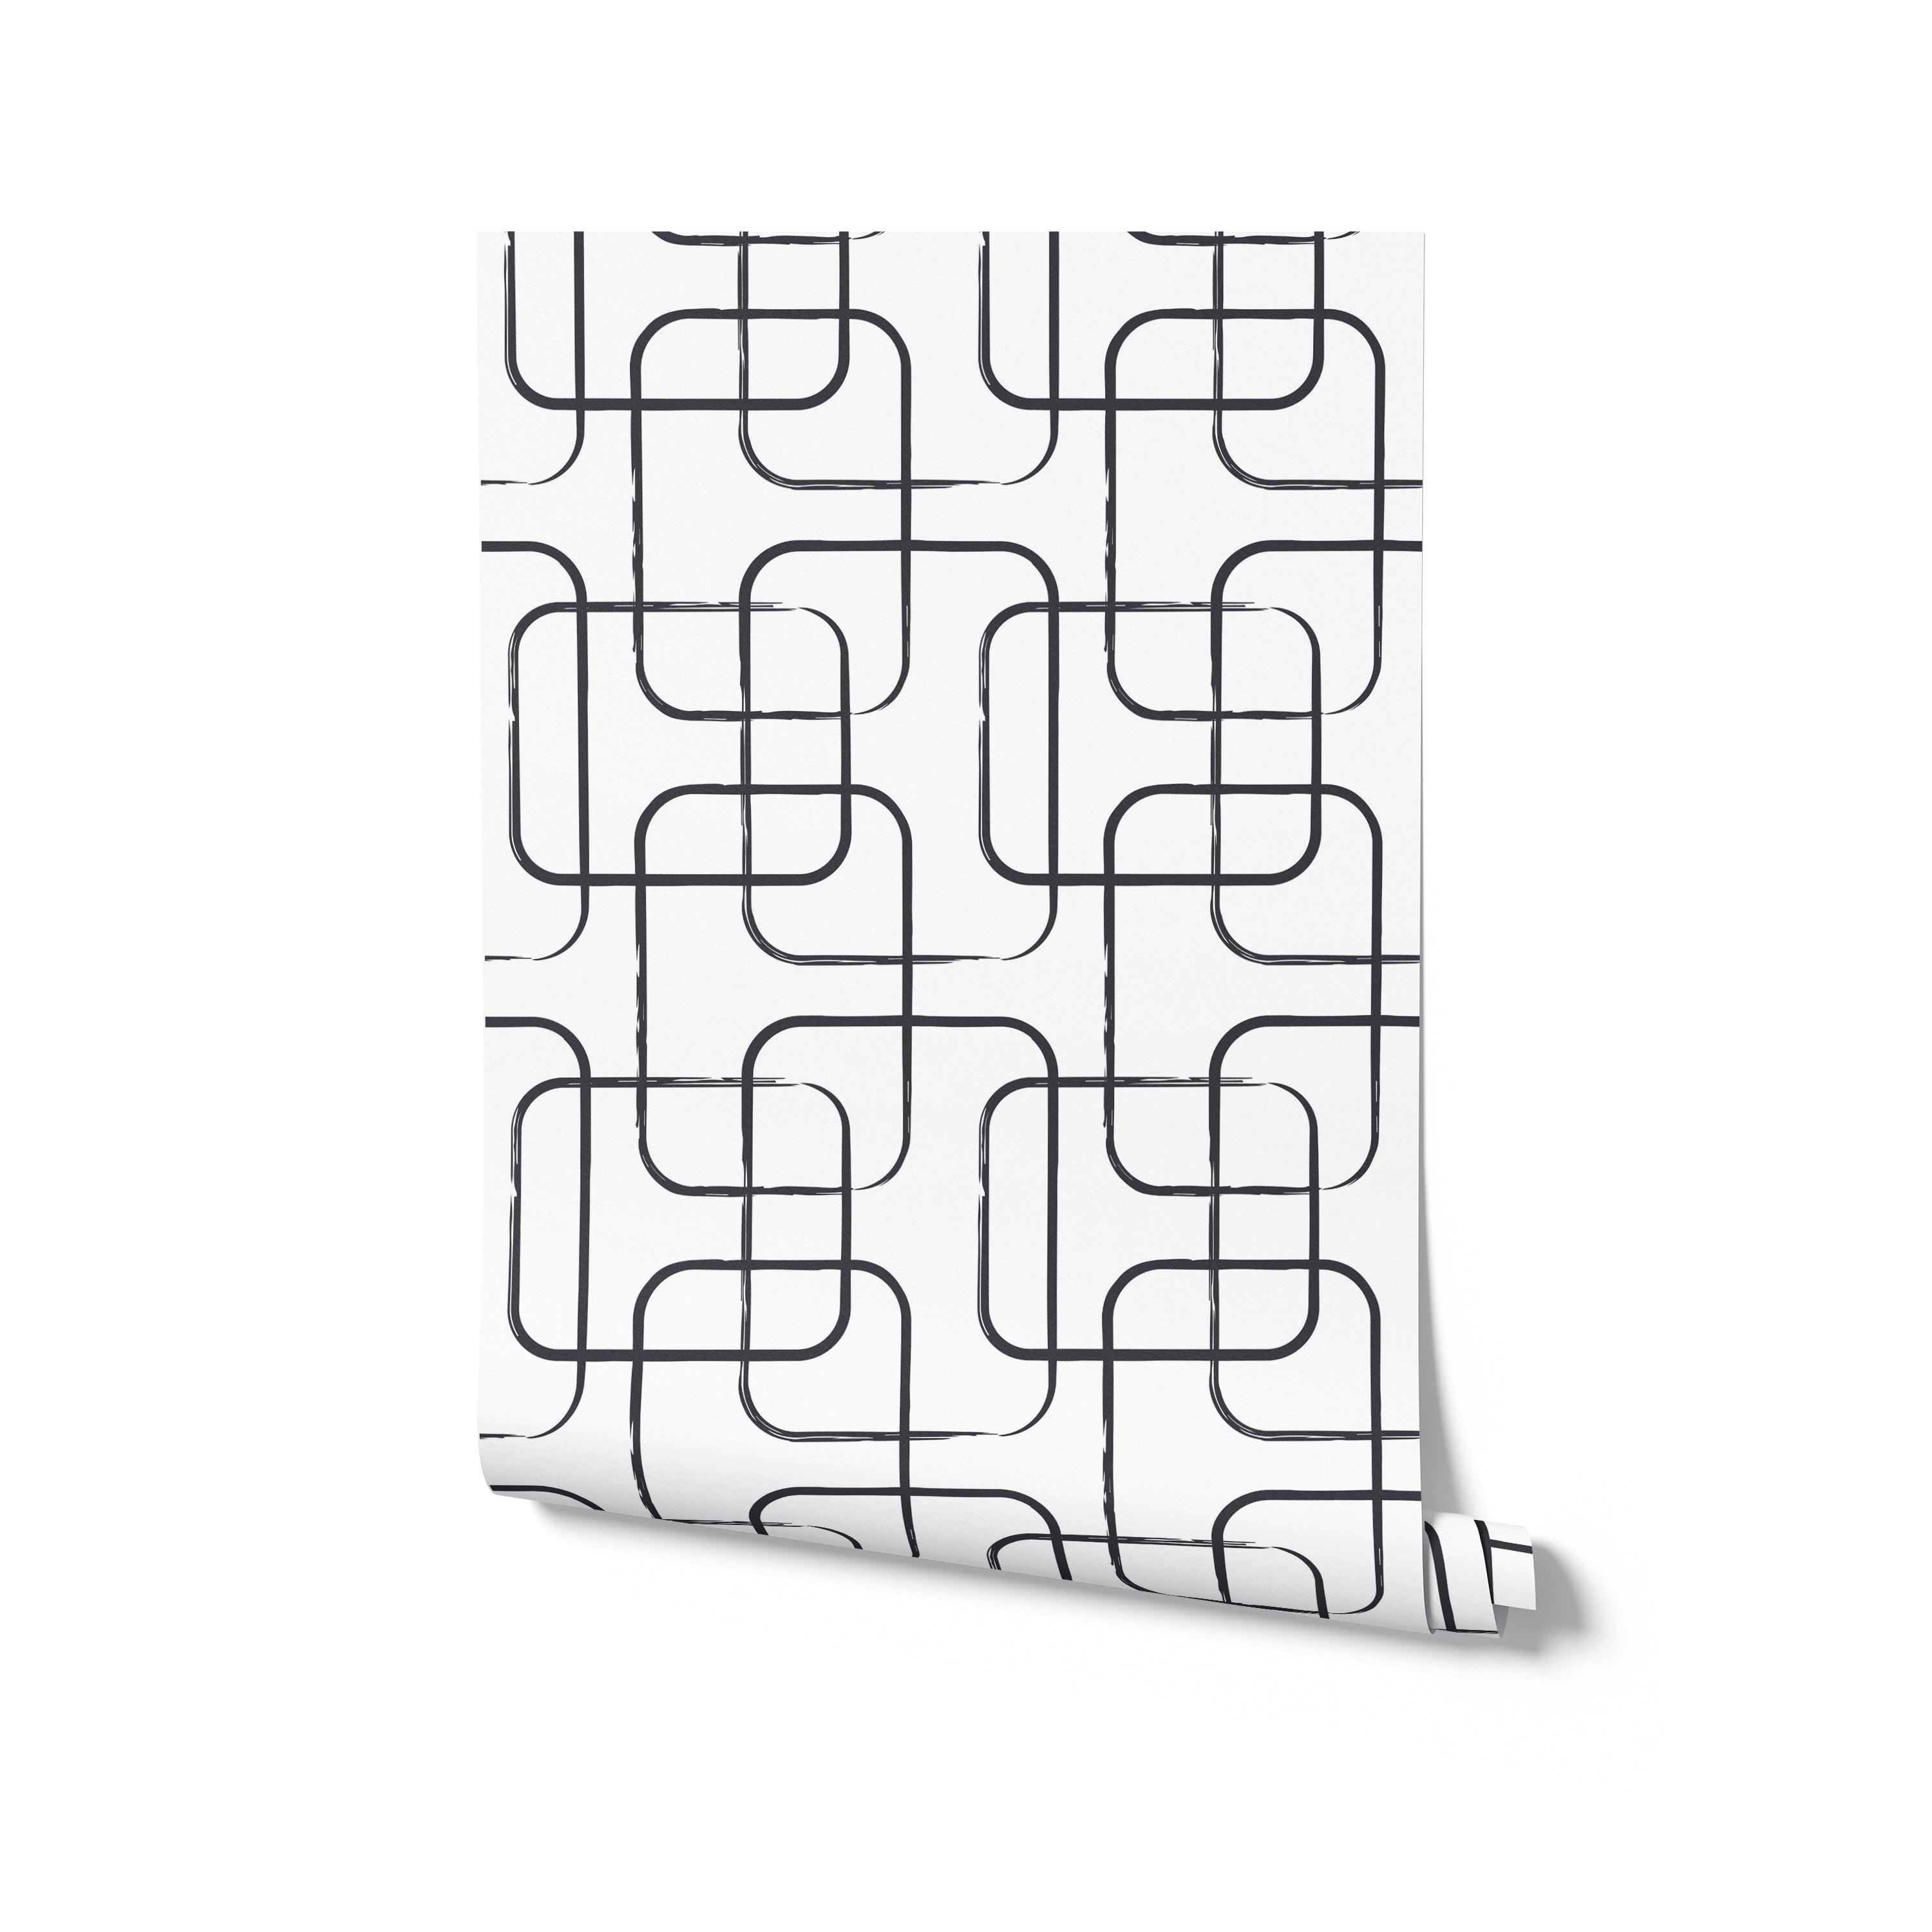 A roll of the Midnight Wallpaper unfurled to showcase the bold, black geometric grid pattern over a pure white backdrop. This wallpaper exemplifies modern design and would make a statement in any room it adorns.